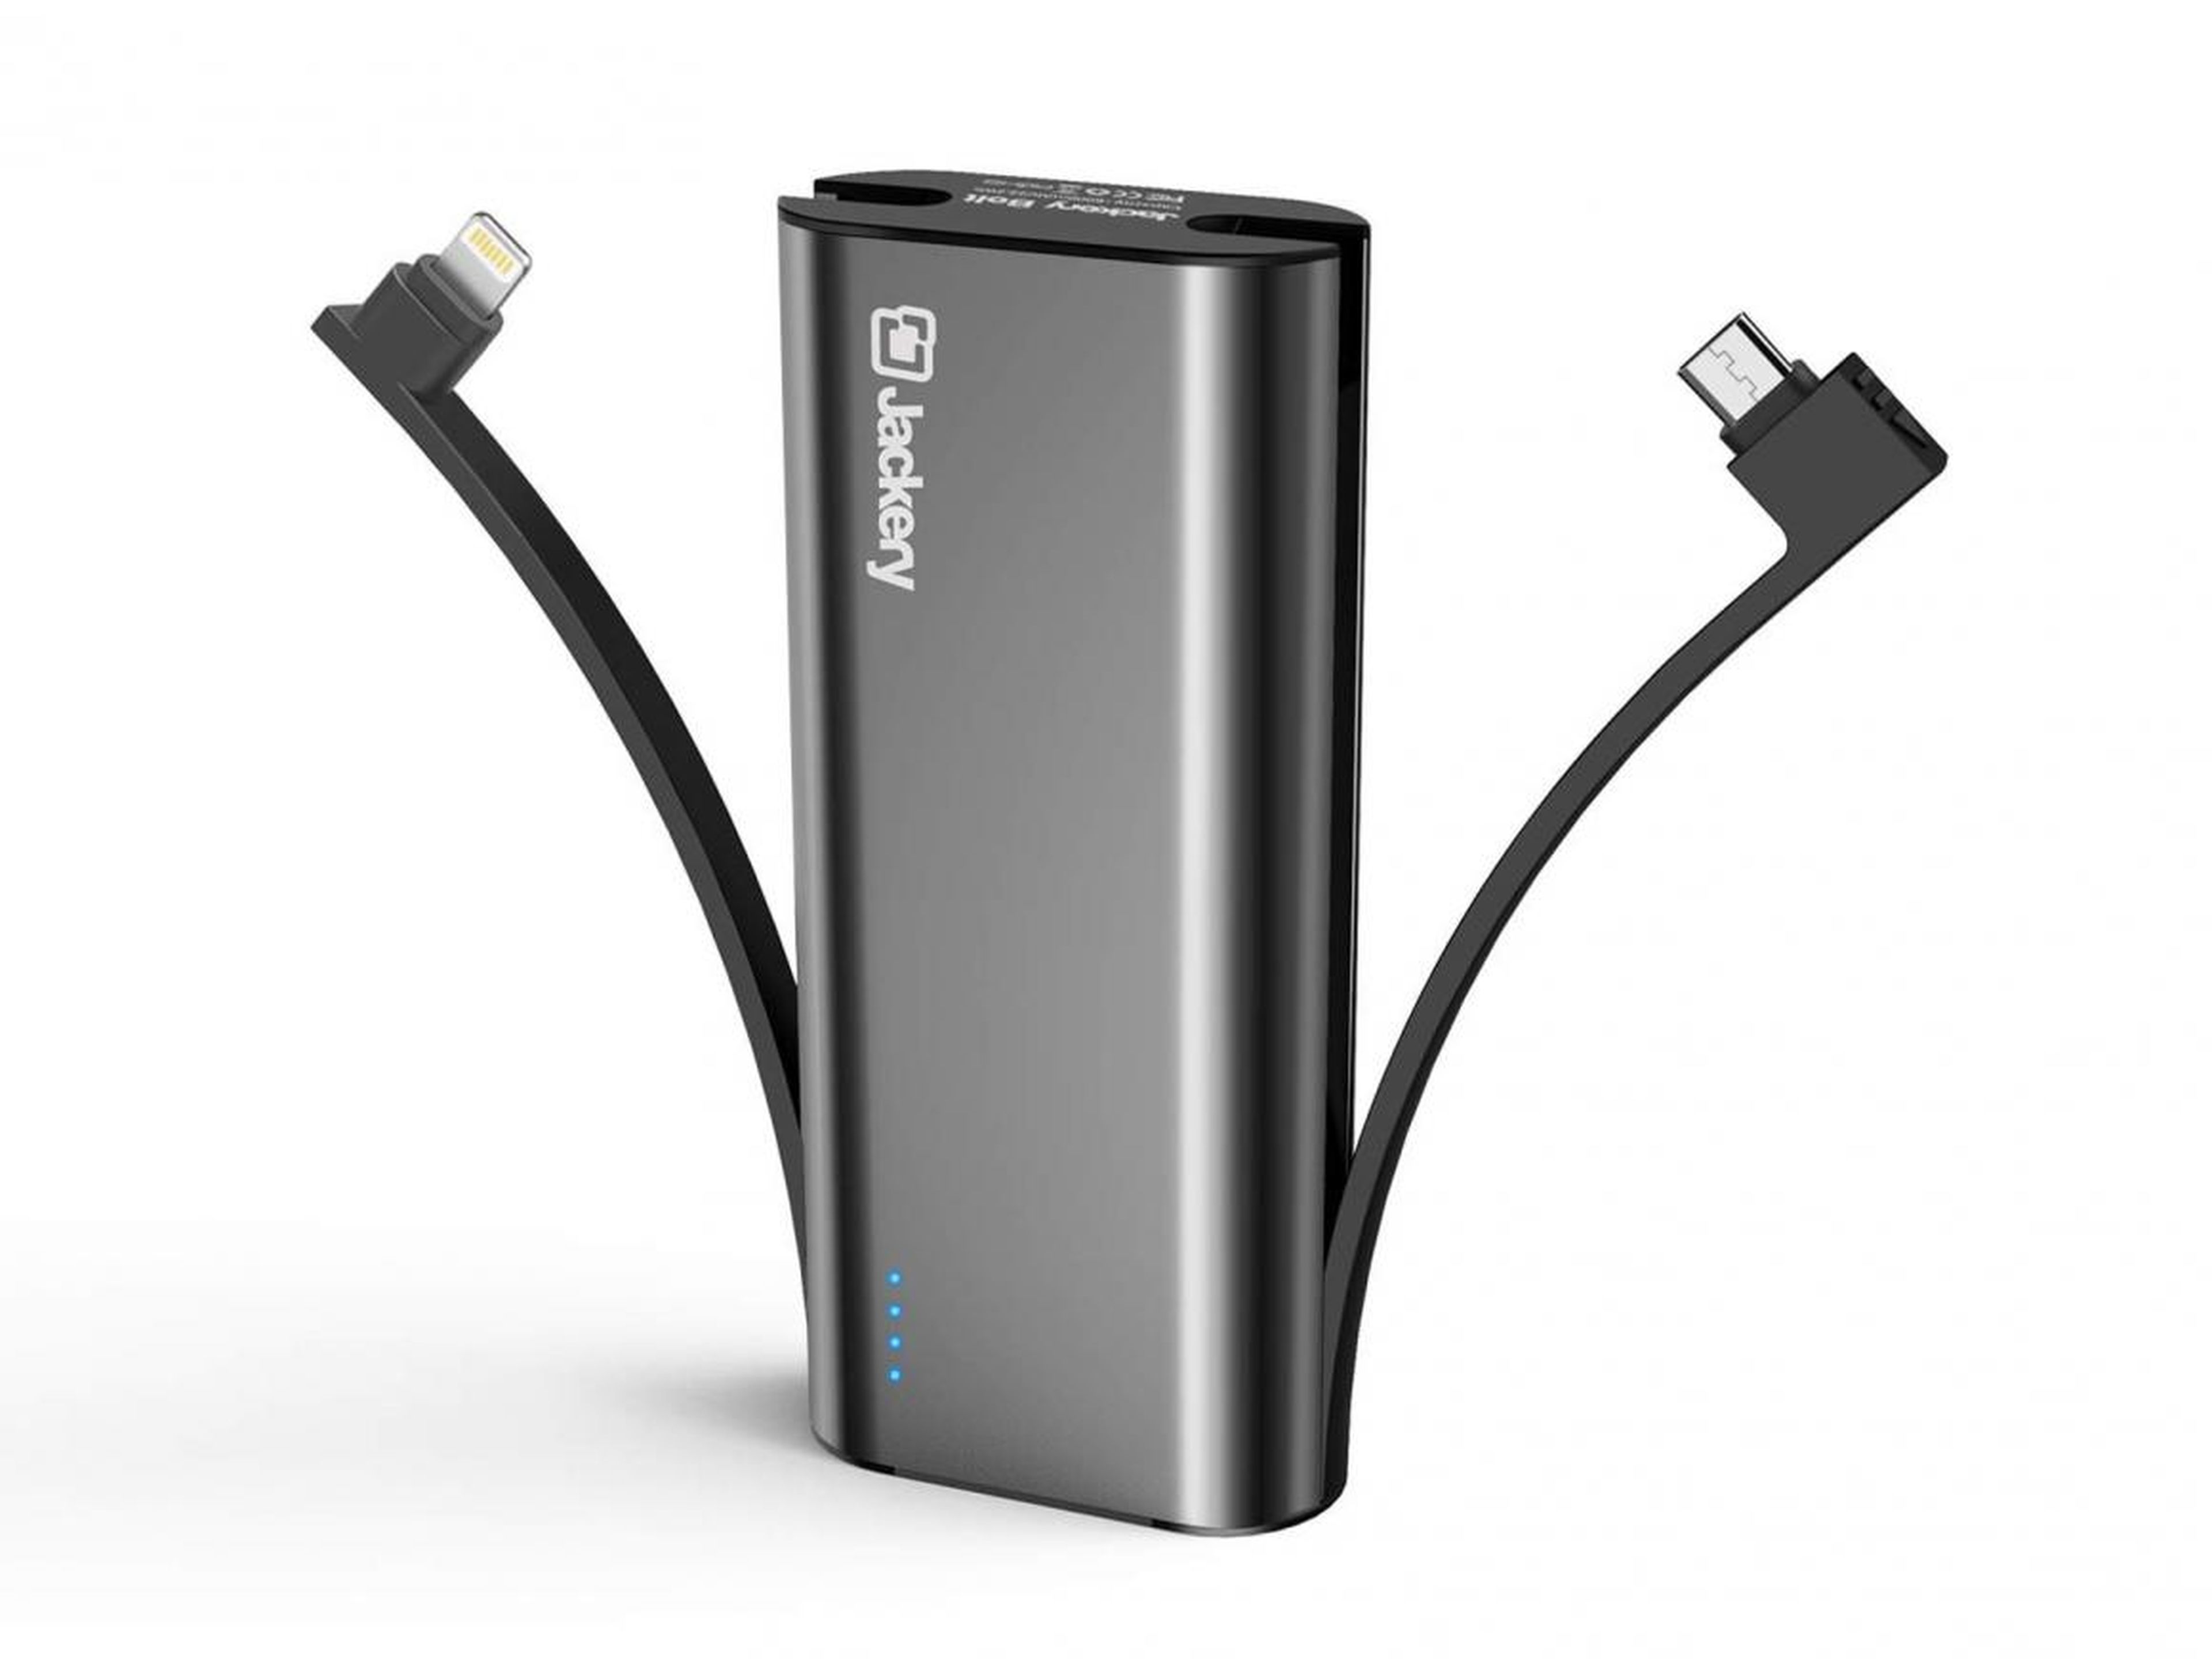 The best portable charger you can buy, which charges an iPhone twice as fast as the original iPhone charger